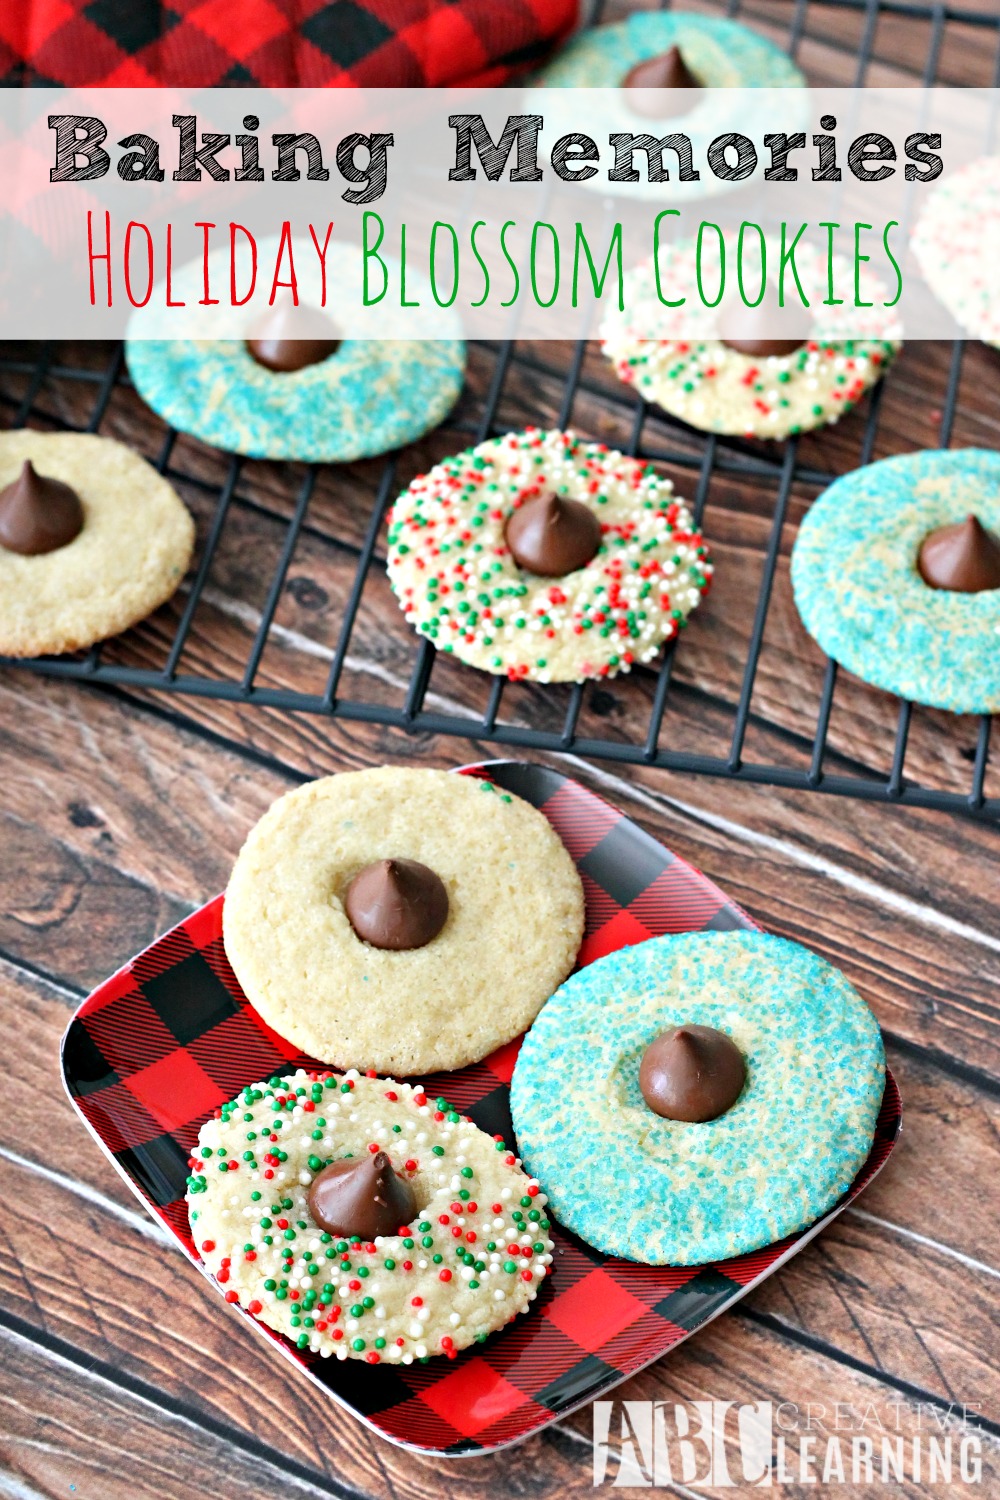 Baking Memories with Holiday Blossom Cookies